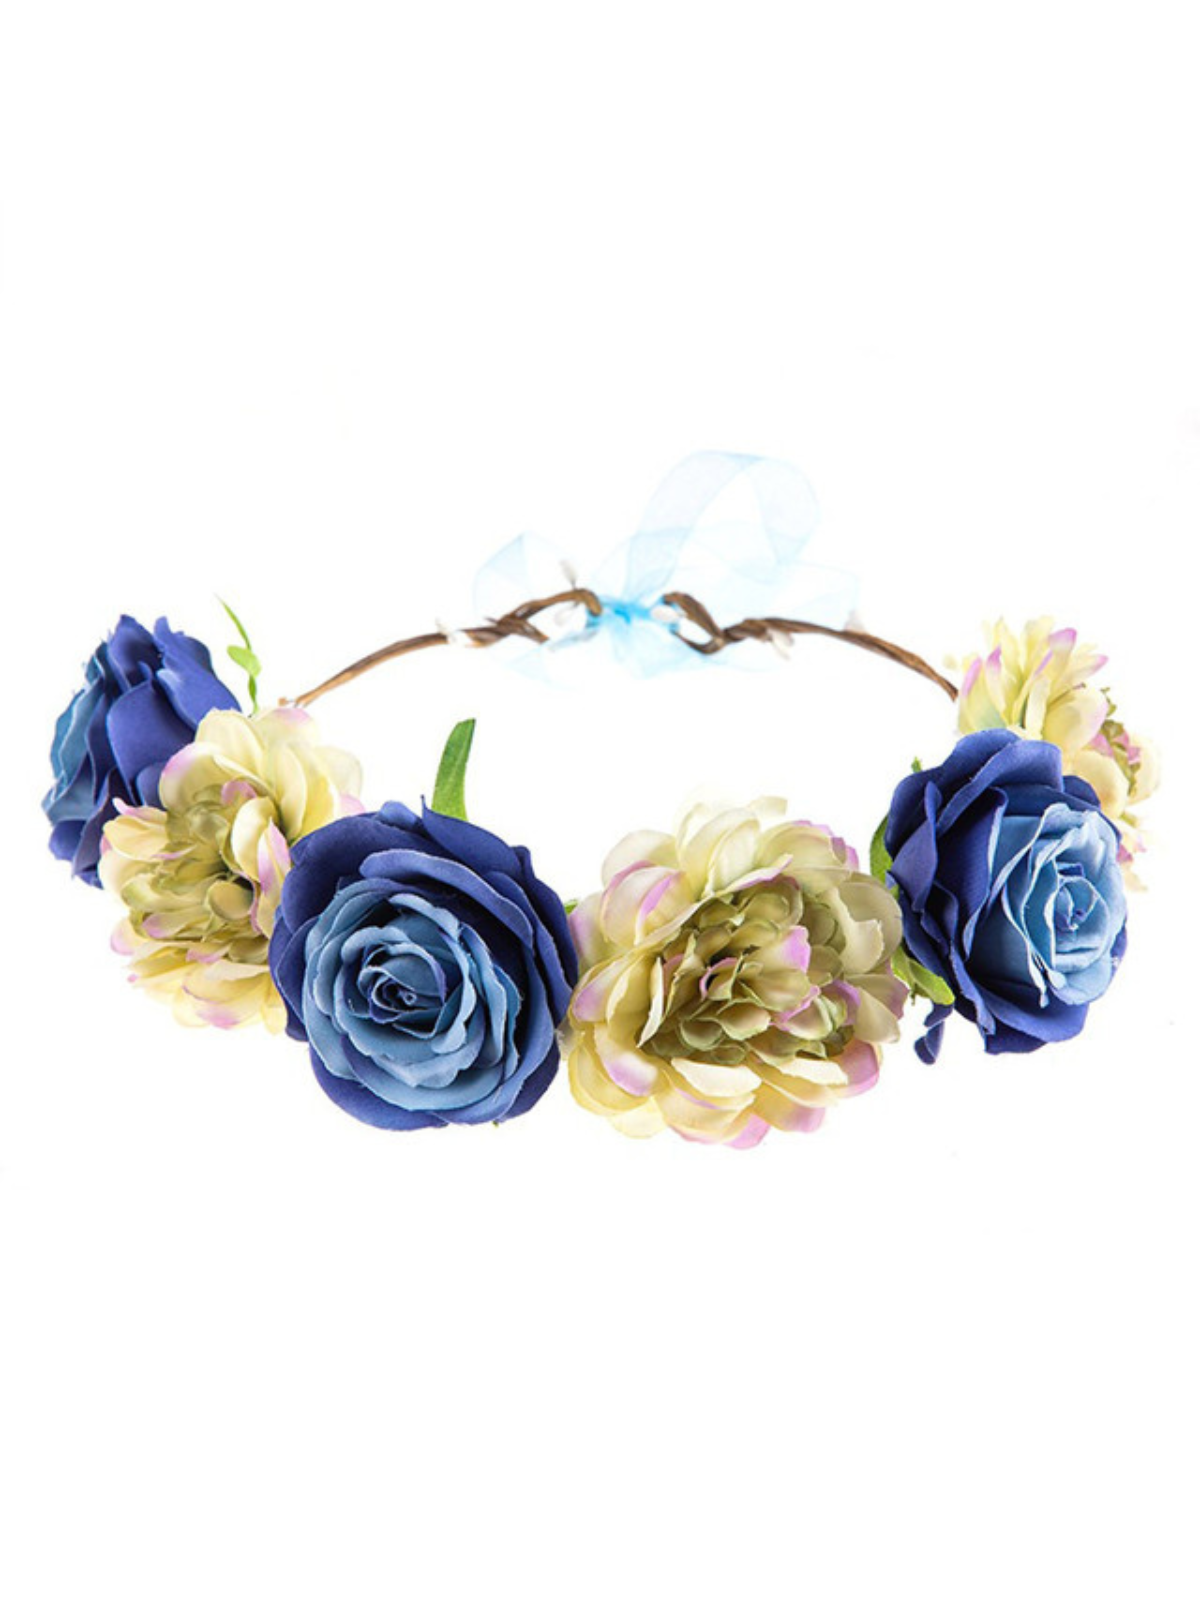 Her Crowning Glory Blue Flower Crown